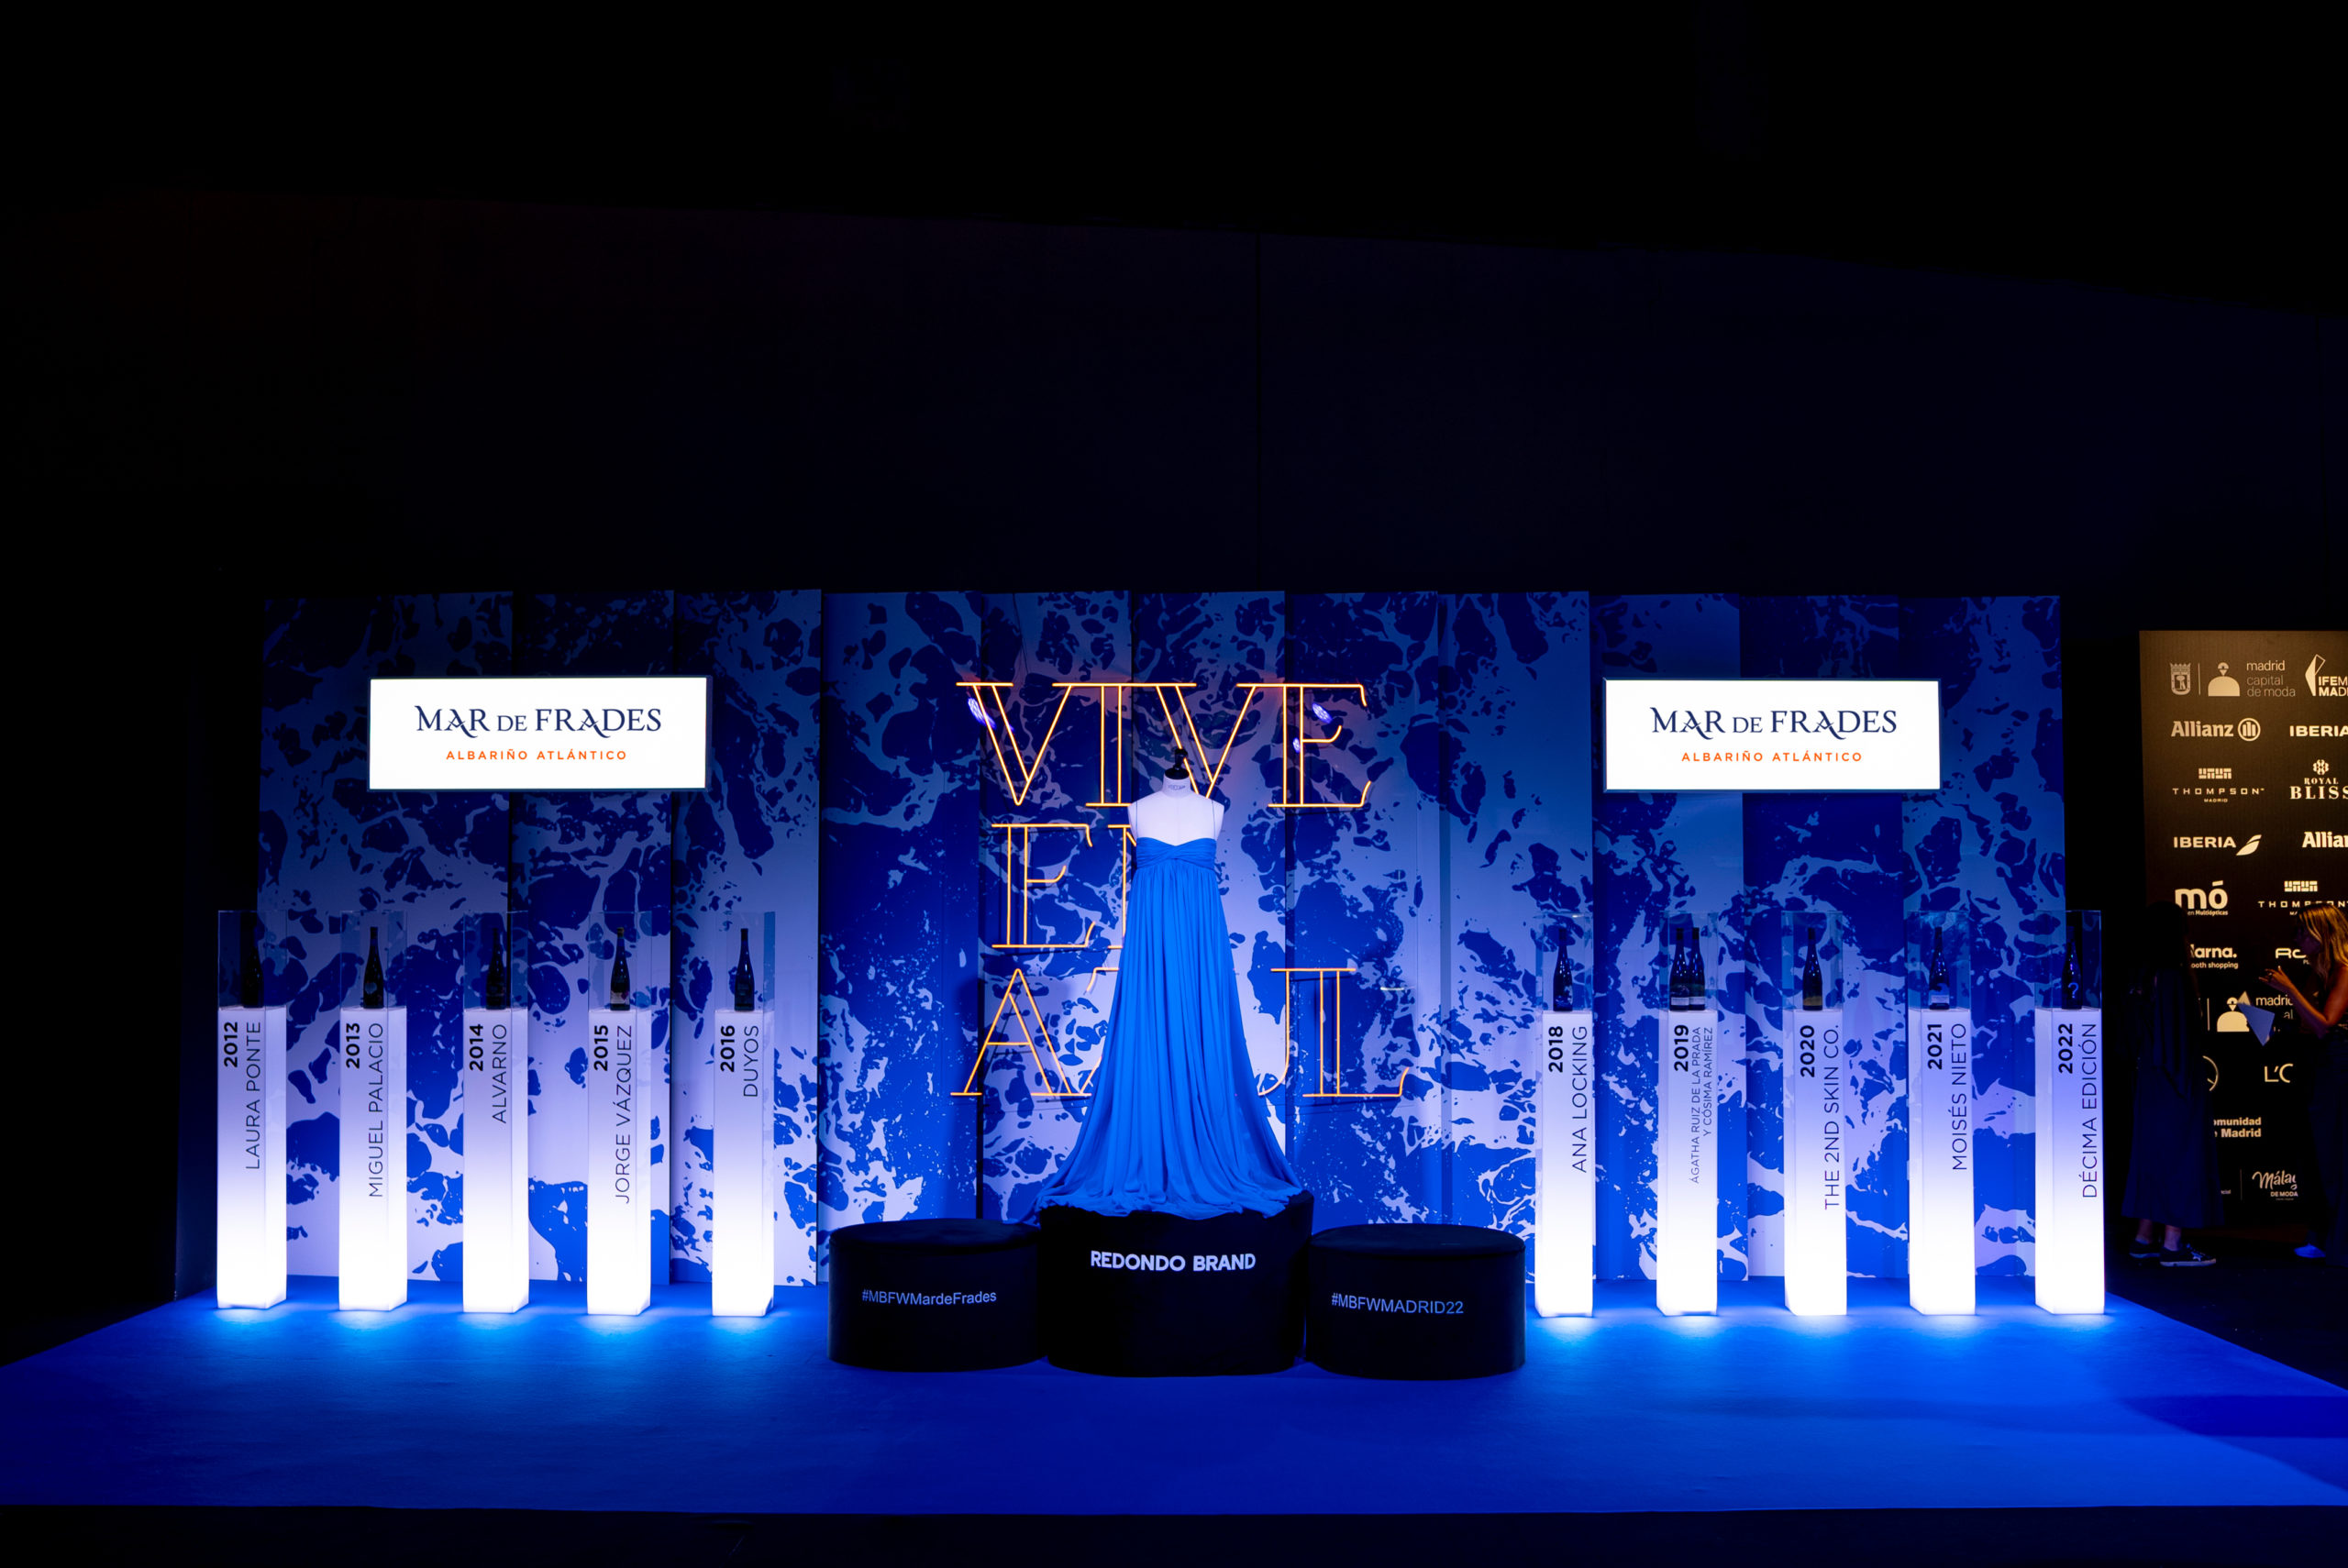 MAR DE FRADES ONCE AGAIN SHOWS ITS SUPPORT FOR FASHION AND DESIGN AT THE 76TH EDITION OF THE MERCEDES BENZ FASHION WEEK MADRID